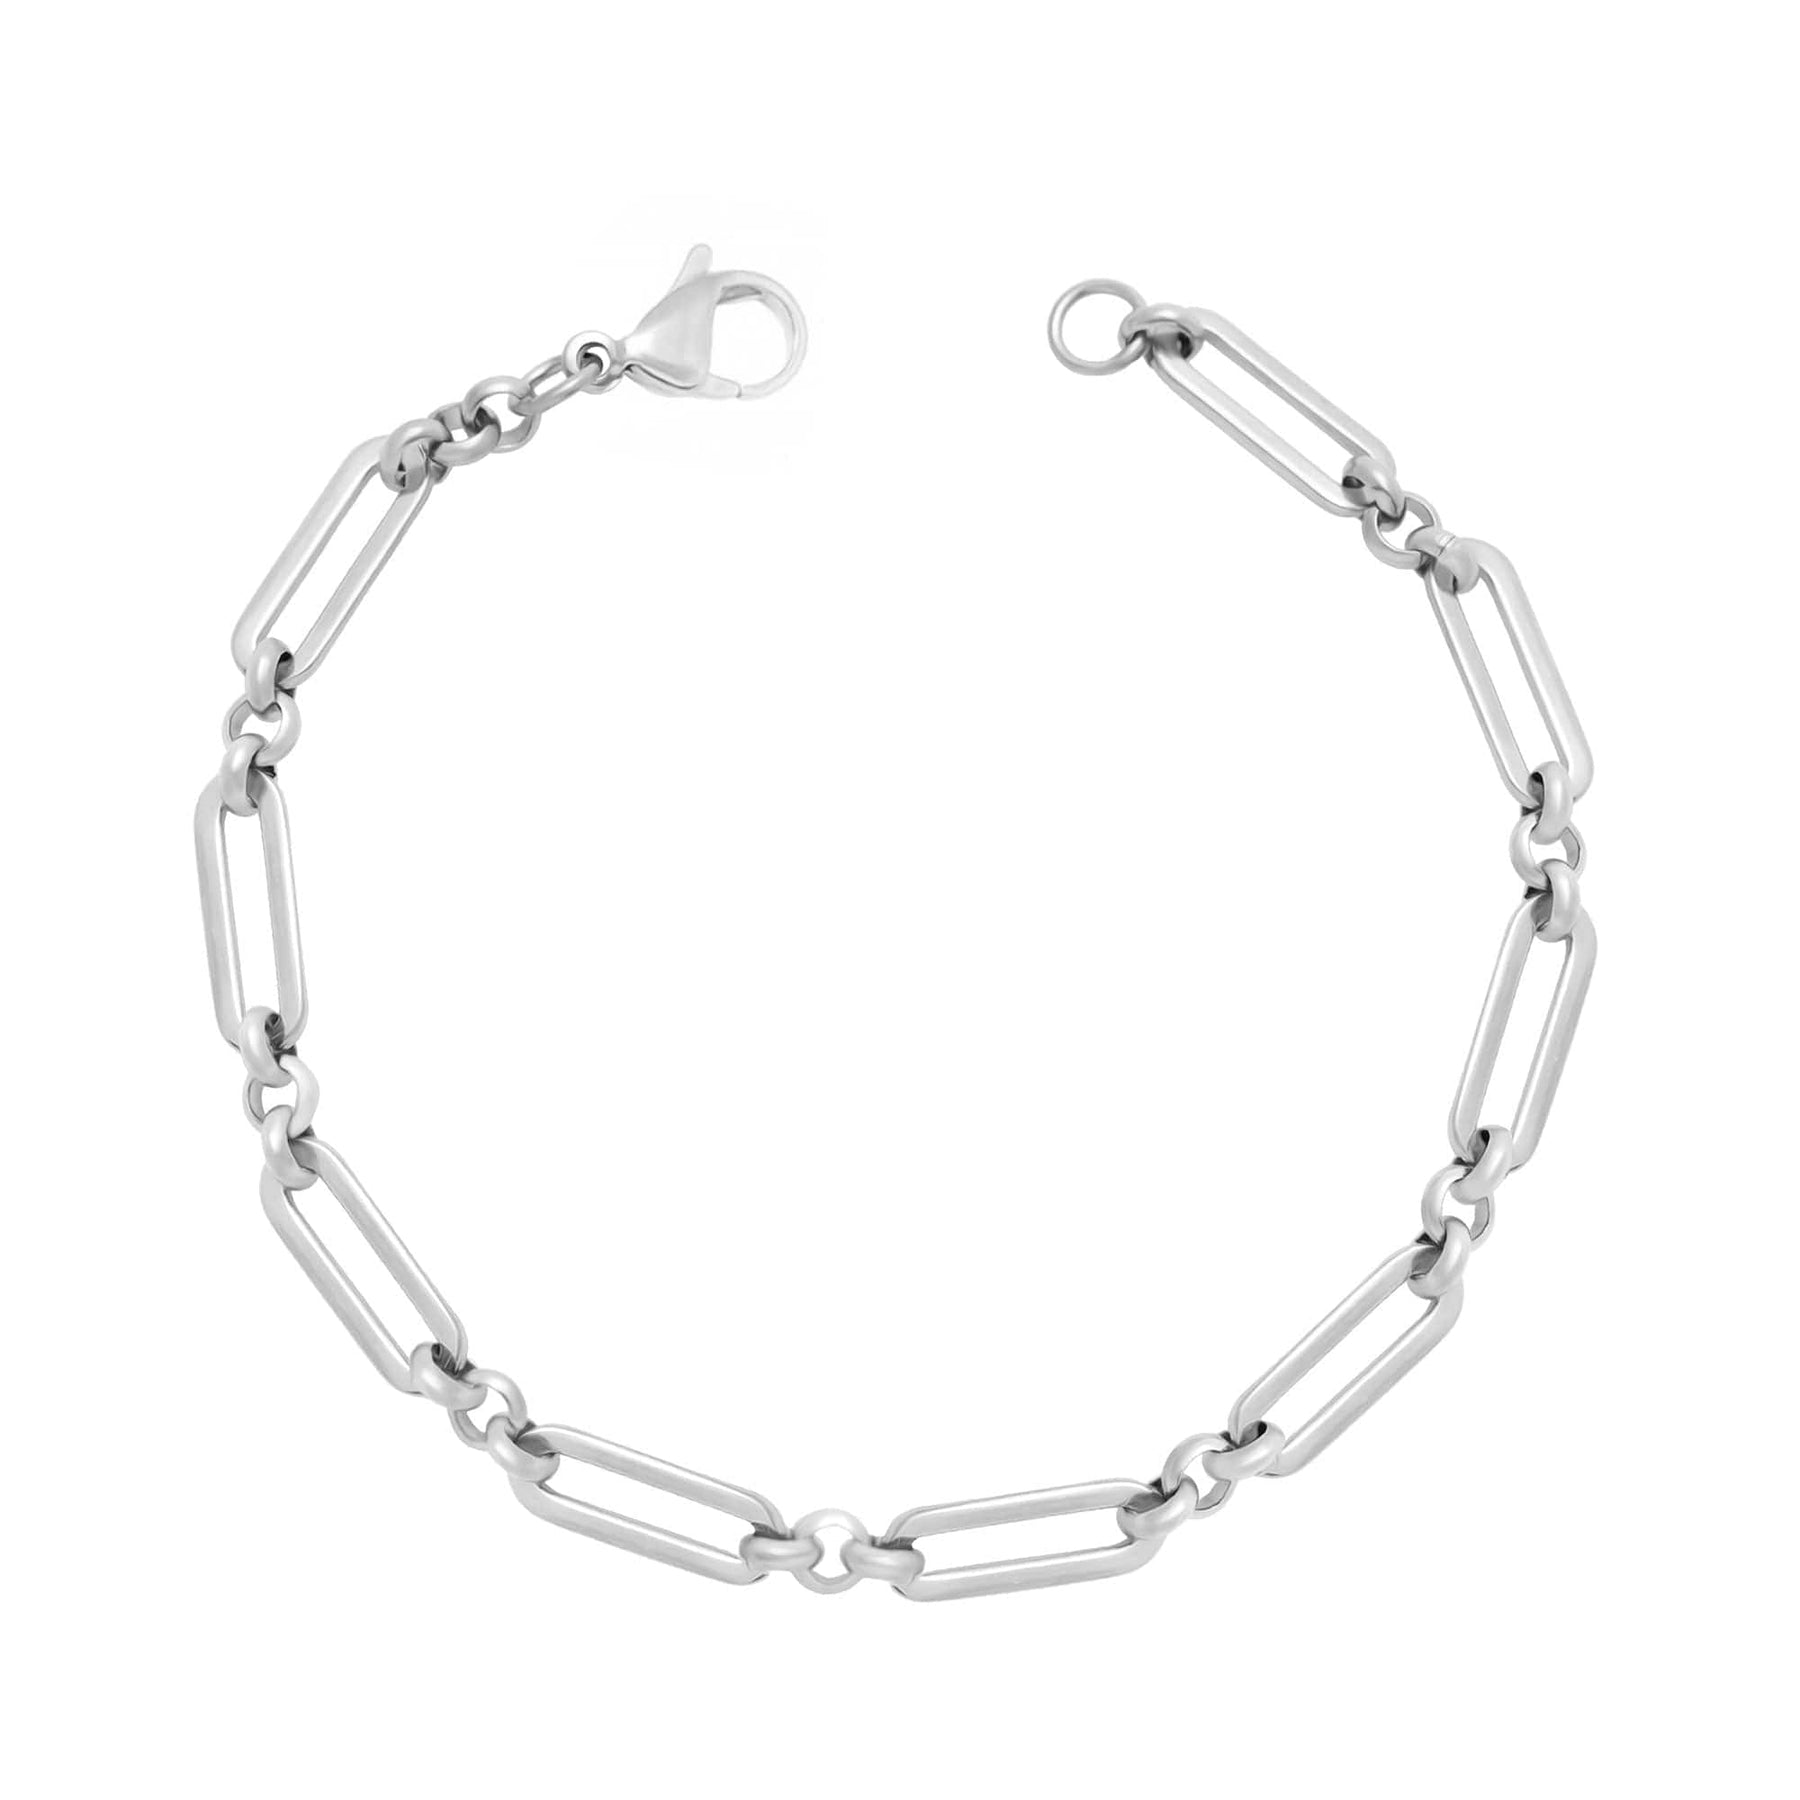 BohoMoon Stainless Steel Axel Bracelet Silver / Small